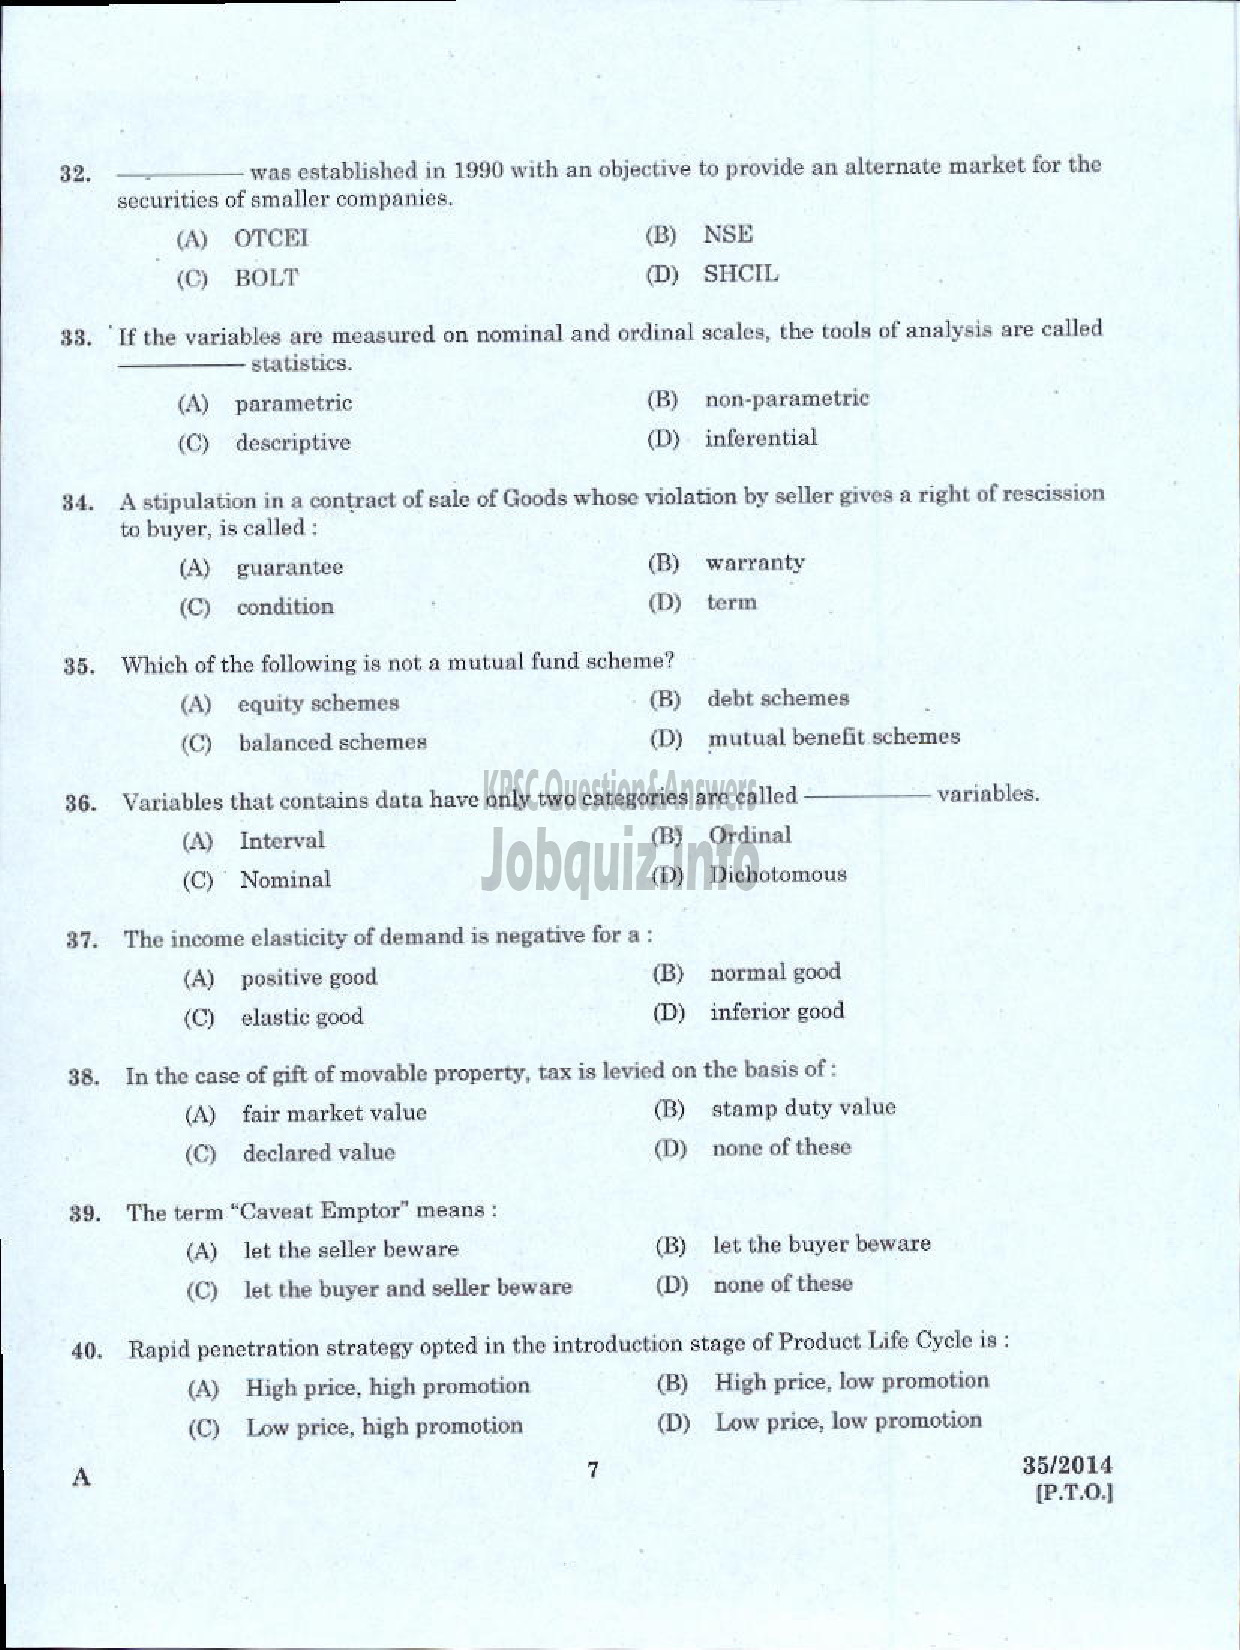 Kerala PSC Question Paper - JUNIOR ASSISTANT ACCOUNTS SR FOR ST ONLY TRAVANCORE COCHIN CHEMICALS LIMITED-5